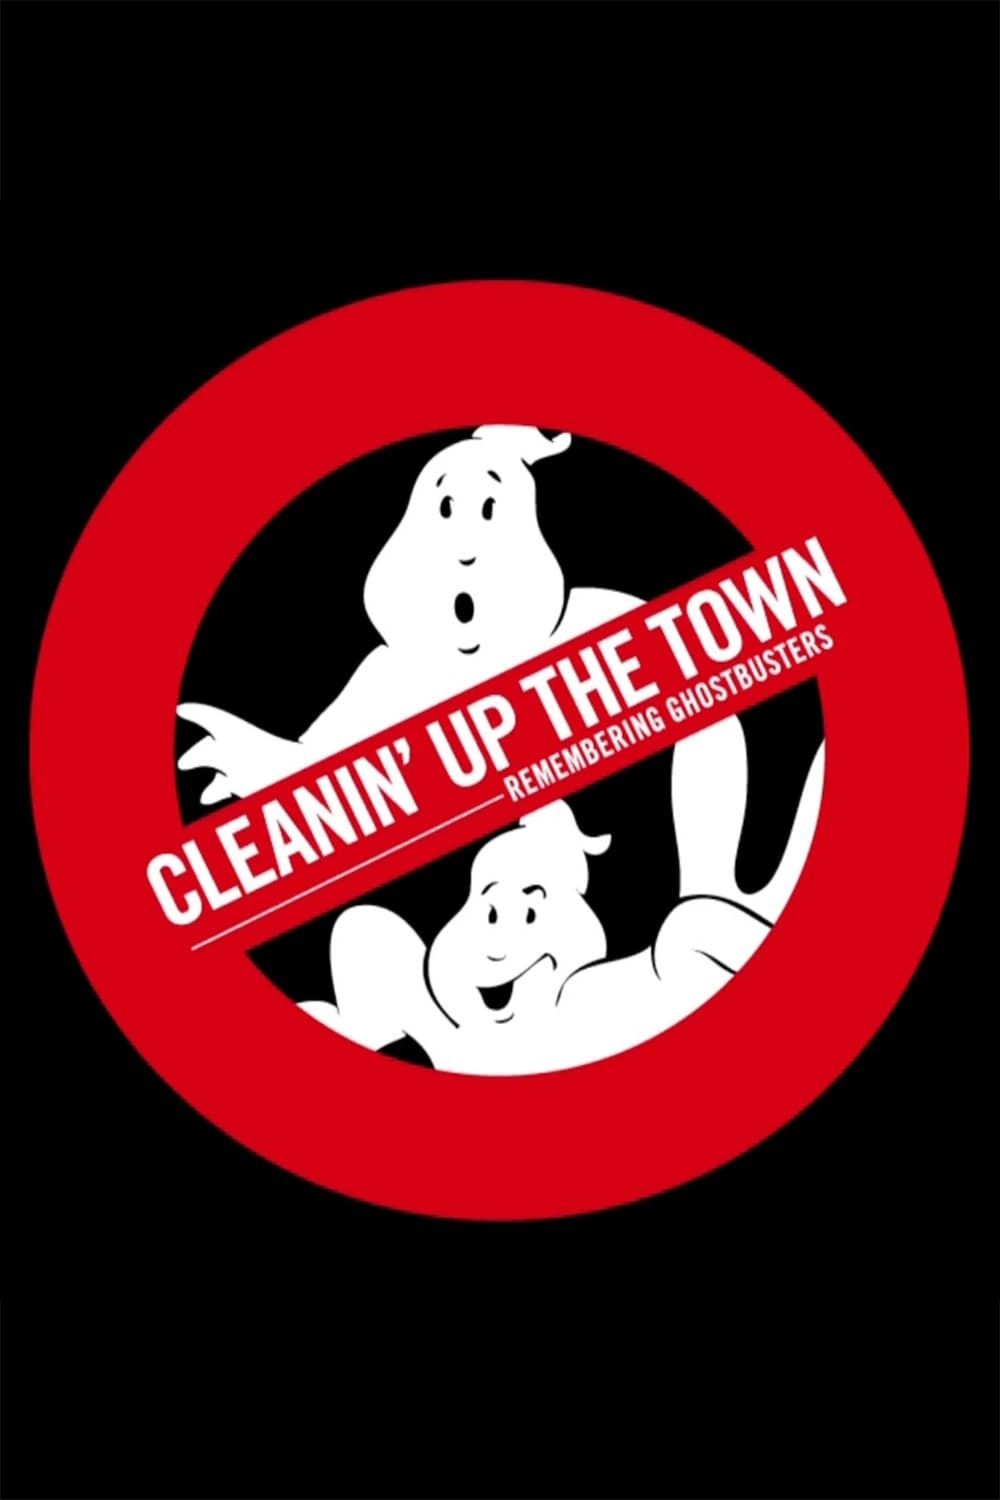 Cleanin Up the Town: Remembering Ghostbusters